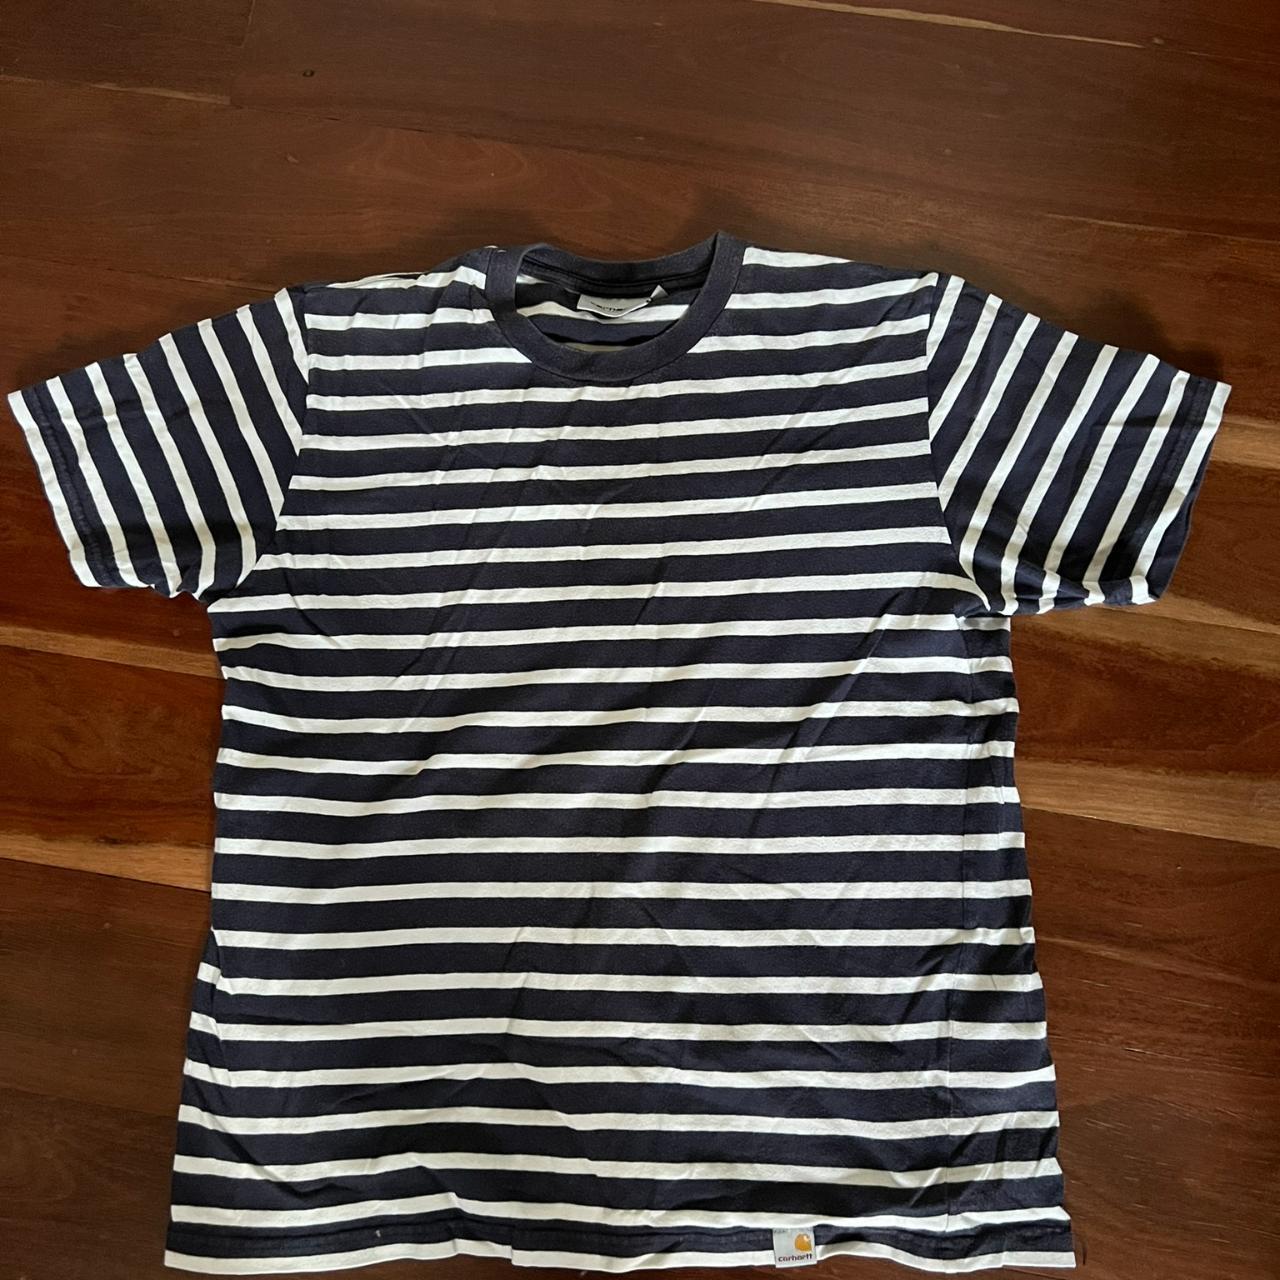 Carhartt Vintage Navy and White striped tee - Depop